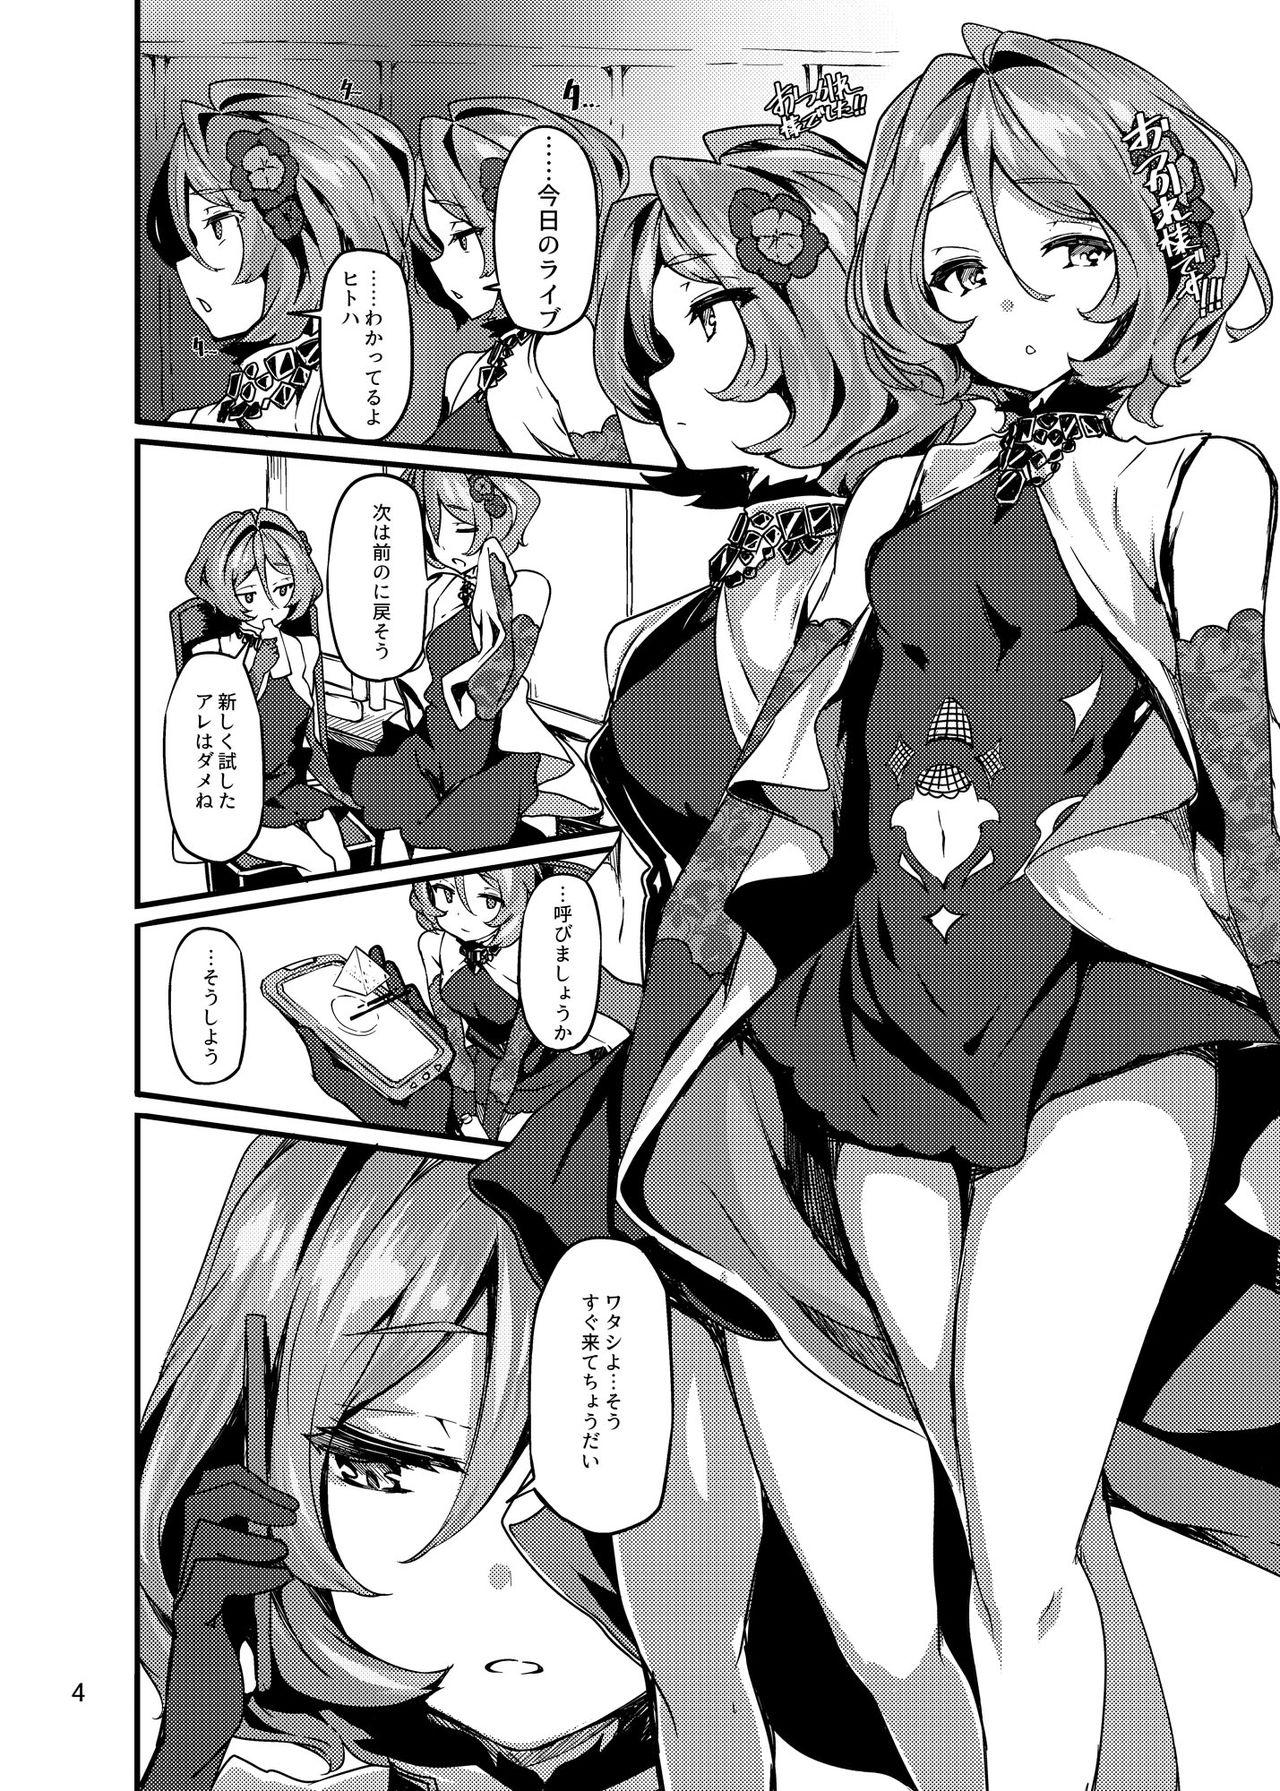 Curious Twin x Sense - Tokyo 7th sisters Femdom Porn - Page 3